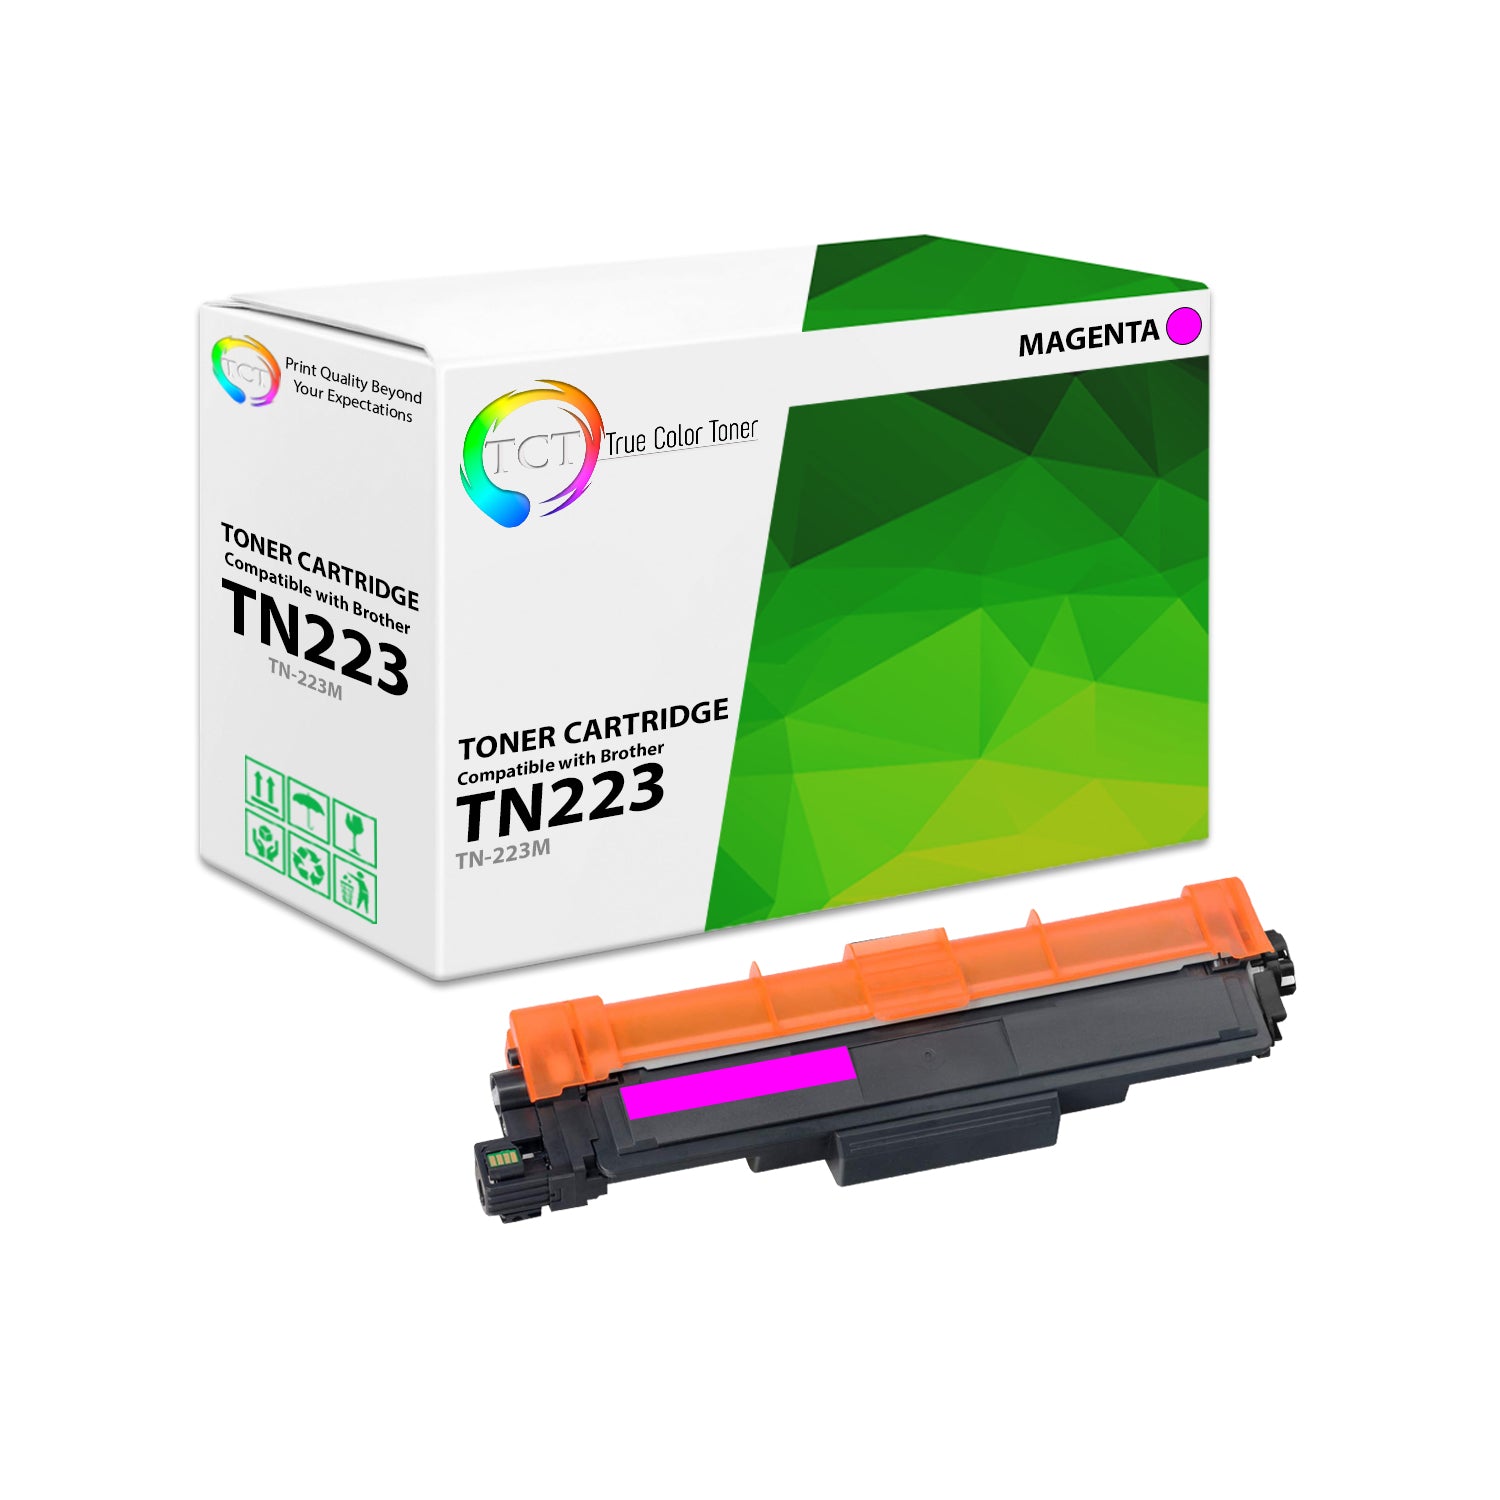 TCT Compatible Toner Cartridge Replacement for the Brother TN223 Series - 1 Pack Magenta